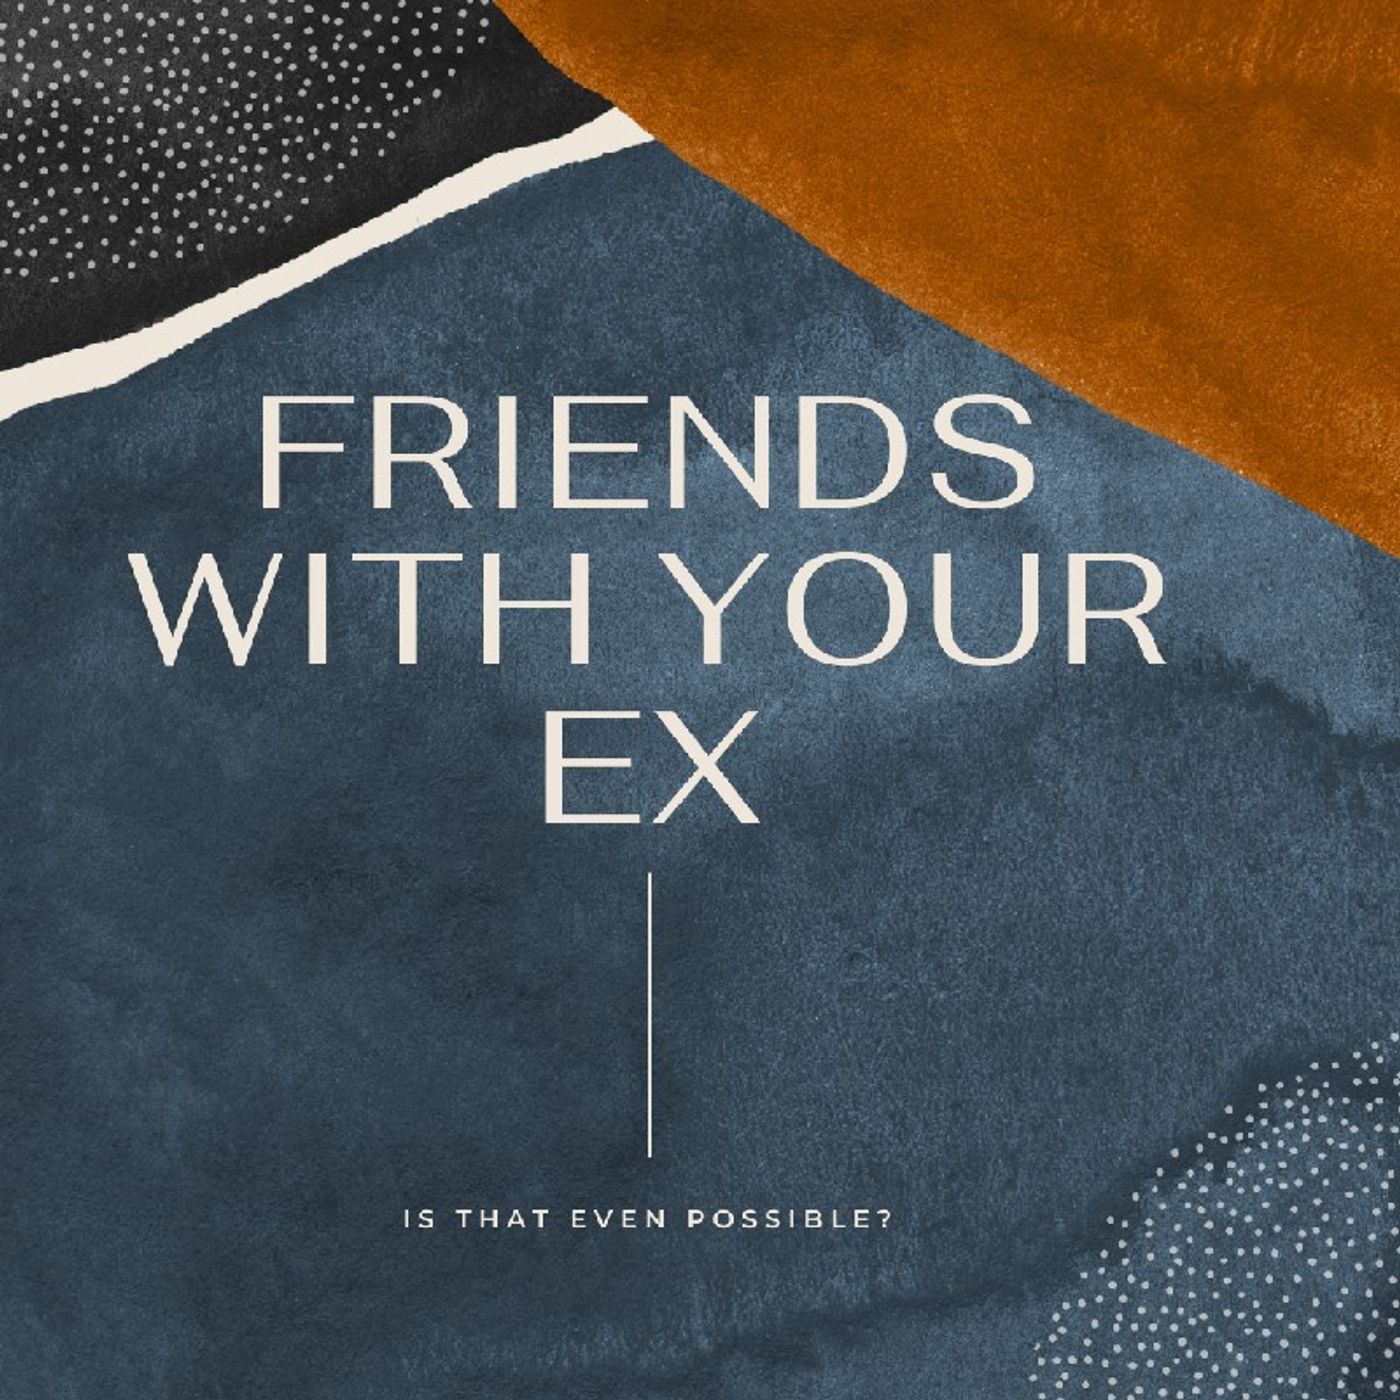 Can You Be Friends With Your Ex? Image